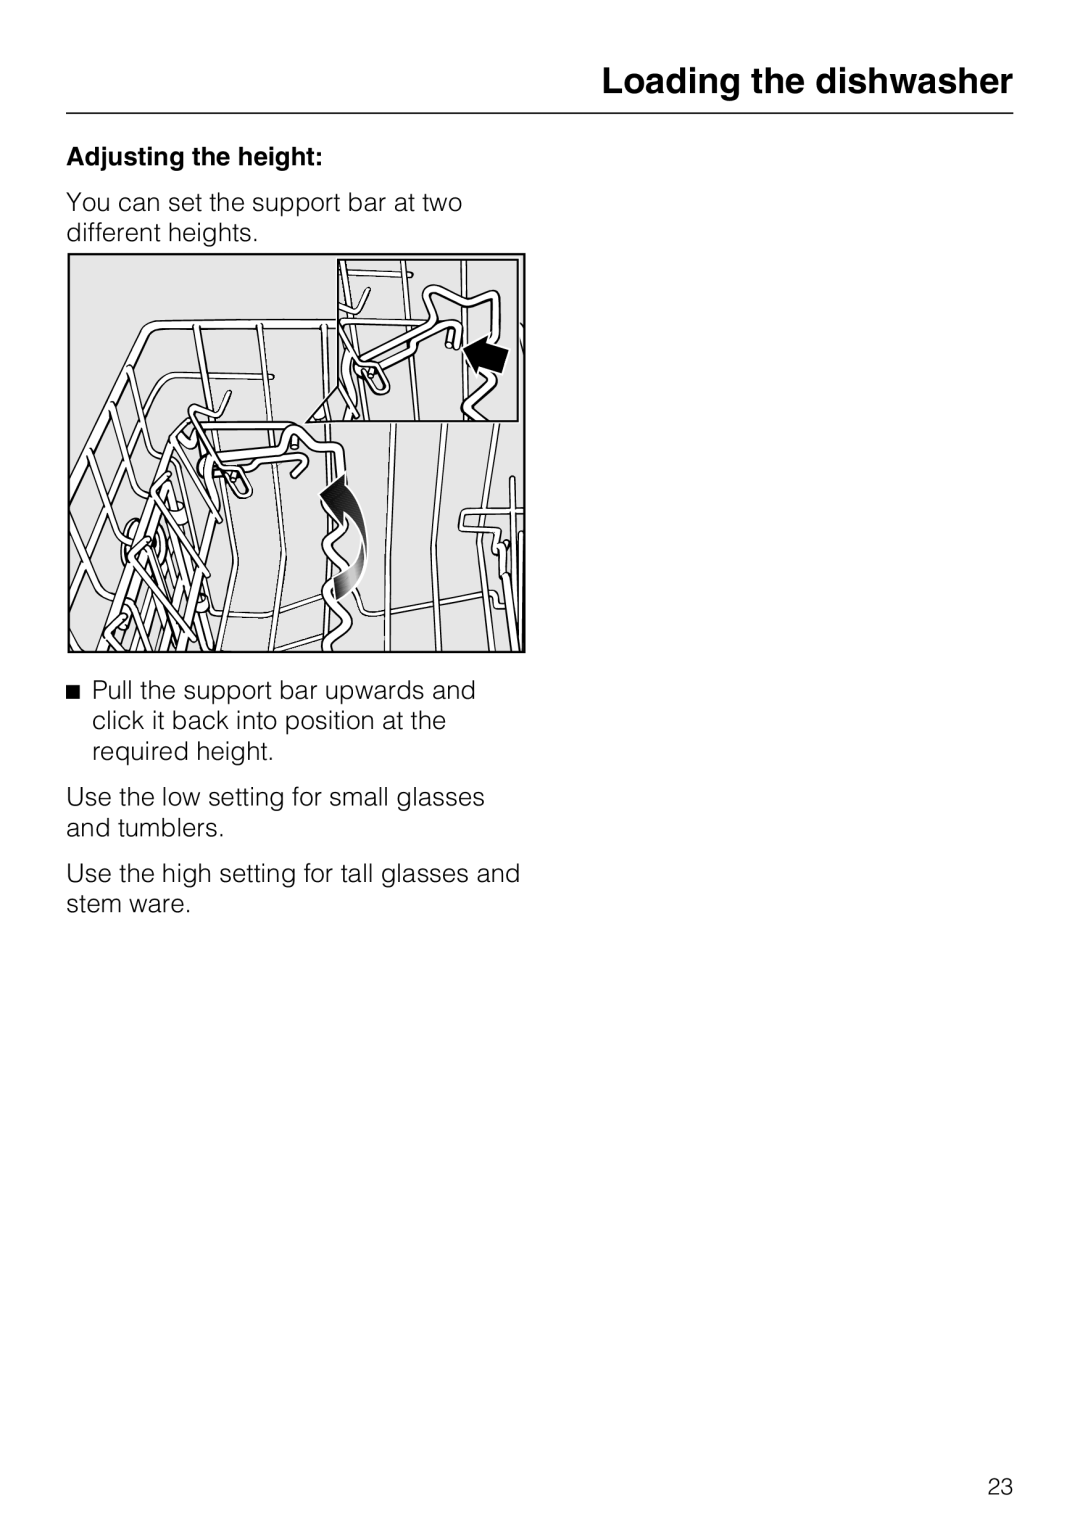 Miele G 5575, G 5570 manual Loading the dishwasher, Adjusting the height 